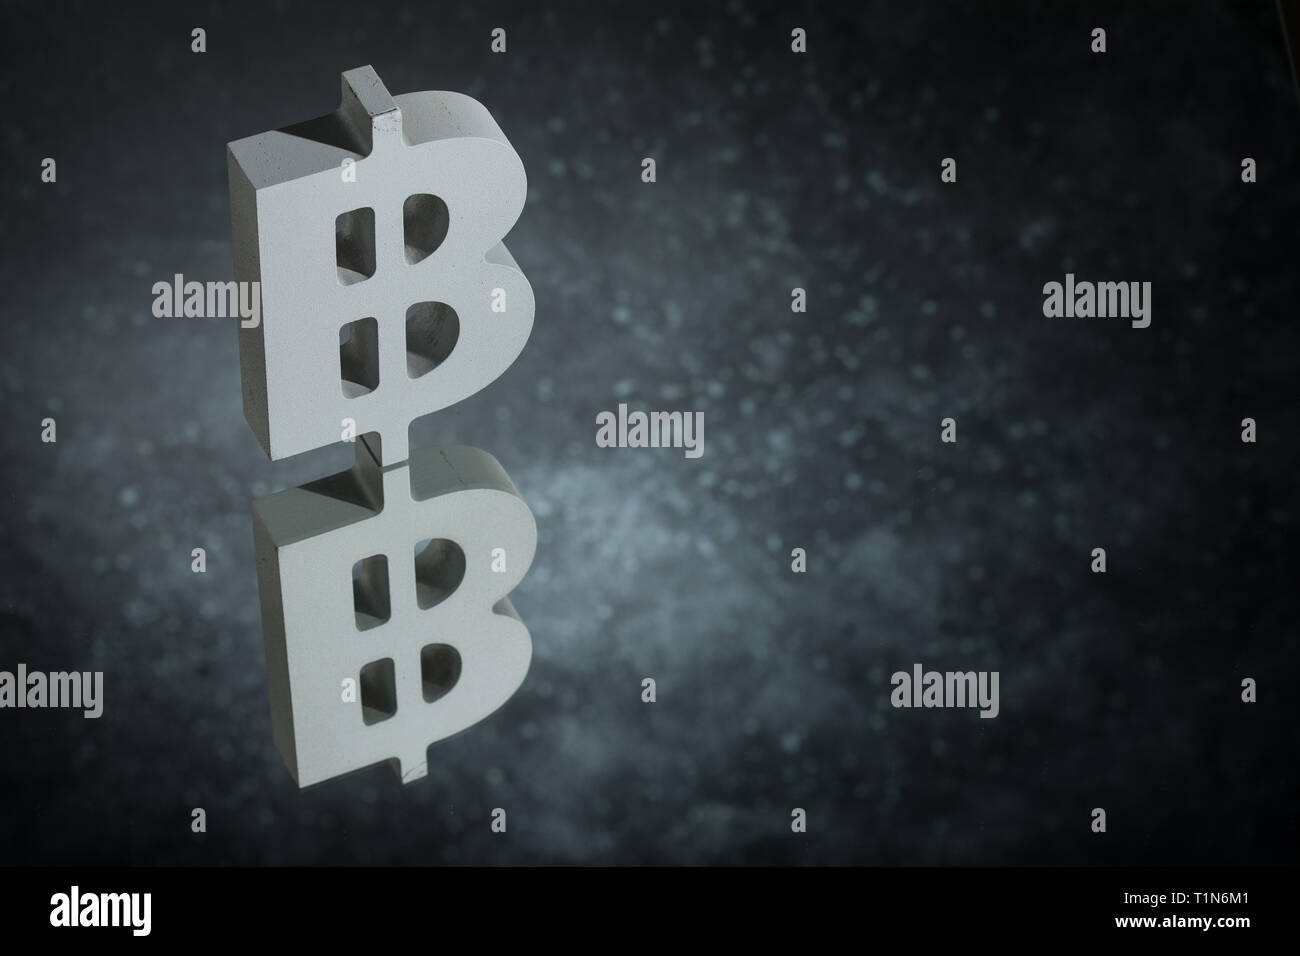 Bitcoin Currency Symbol or Sign With Mirror Reflection on Dark Dusty Background Stock Photo